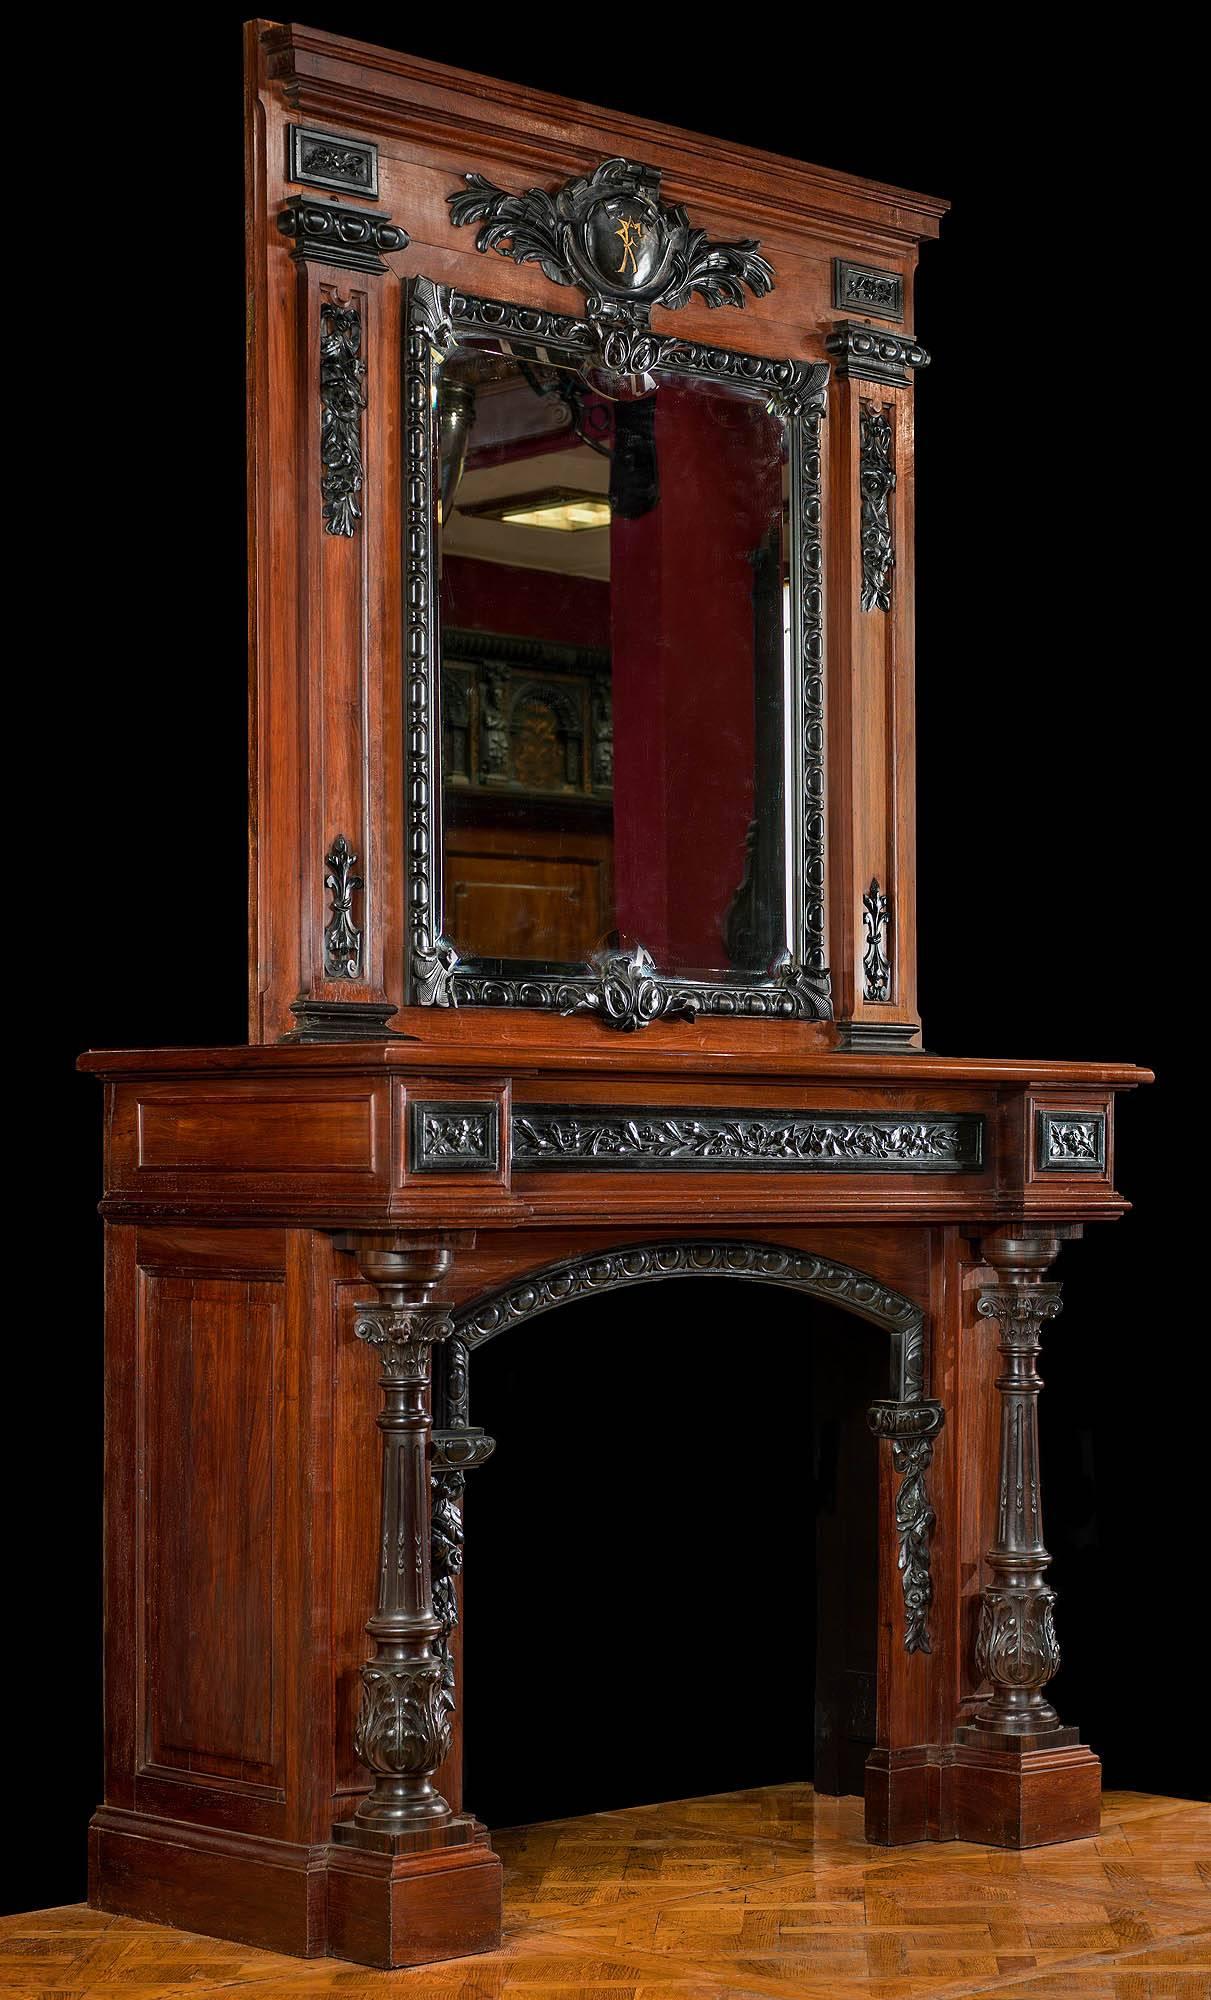 A tall and stately French Baroque style rosewood and ebony chimneypiece. The mirror, framed with egg and dart and fleur-de-lys decoration, is set beneath a large cartouche centred with a monogrammed boss with the letters FF and is flanked by ebony